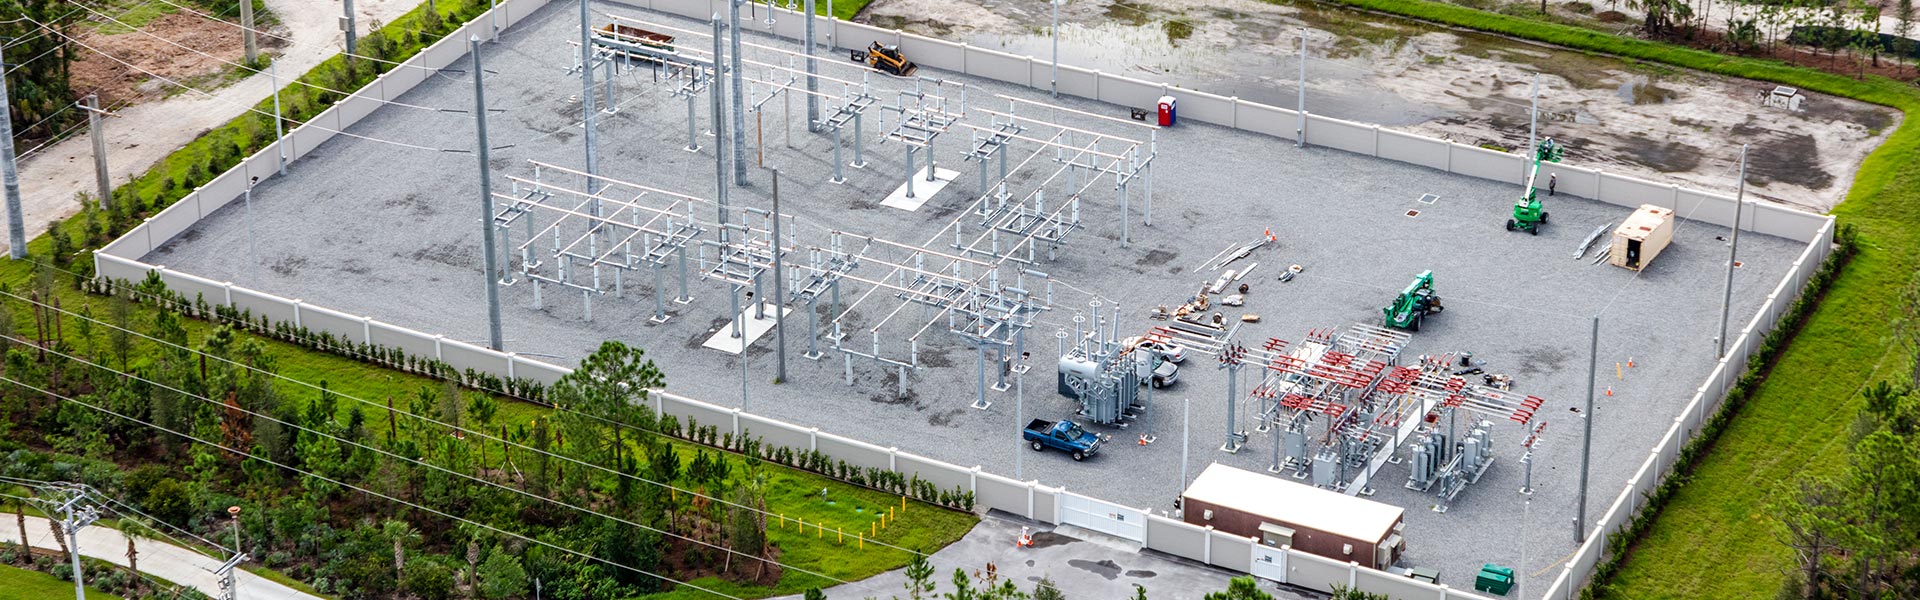 ss-city-service-florida-power-light-fpl-watts-substation-8a-dbe-certified-general-construction-telecom-construction-underground-utility-supply-contractor-1